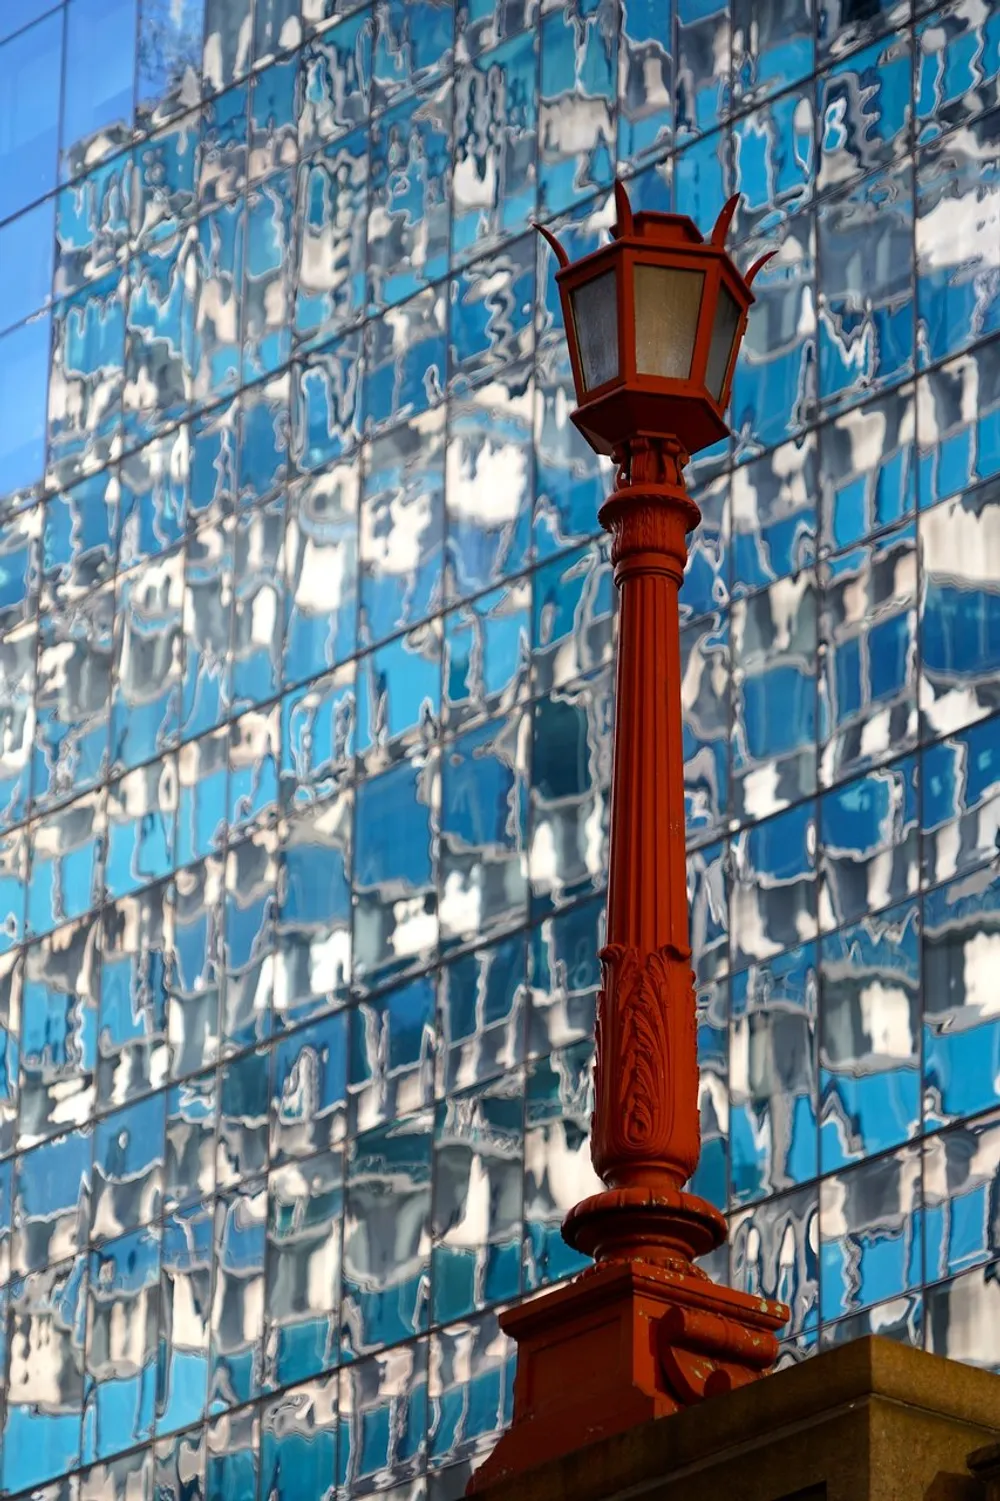 A red street lamp stands in the foreground with a distorted reflection of the blue sky on a glass building behind it